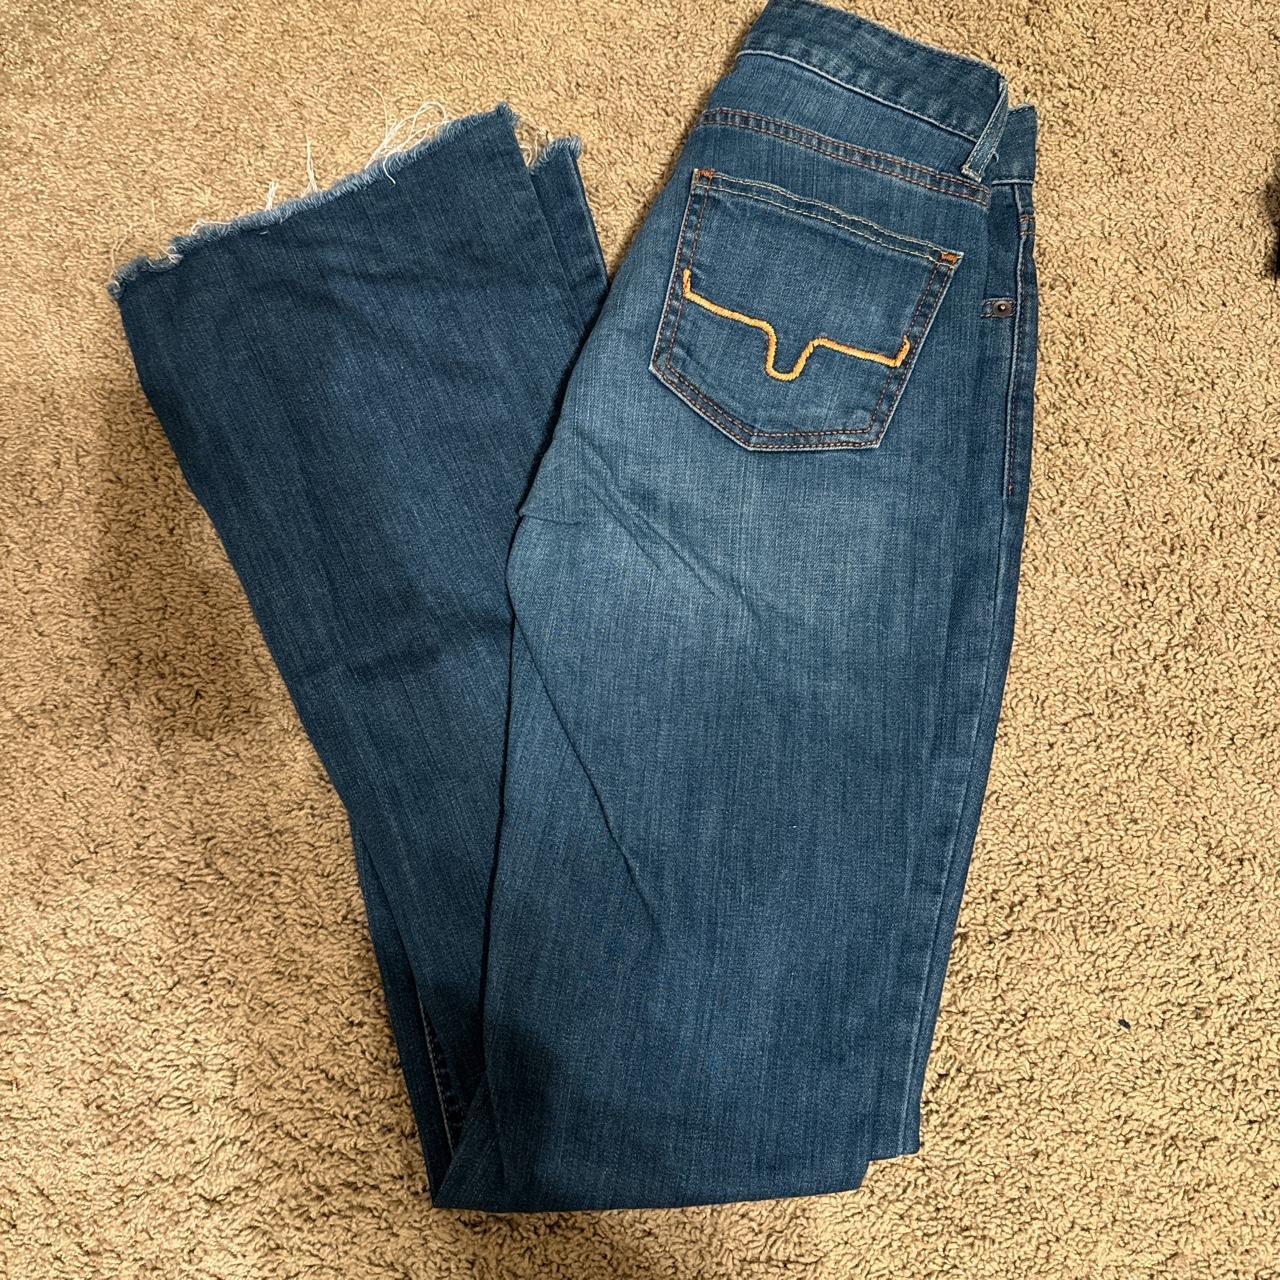 LOLA KIMES JEANS 0/34 Tag says 36 but they’re hemmed... - Depop